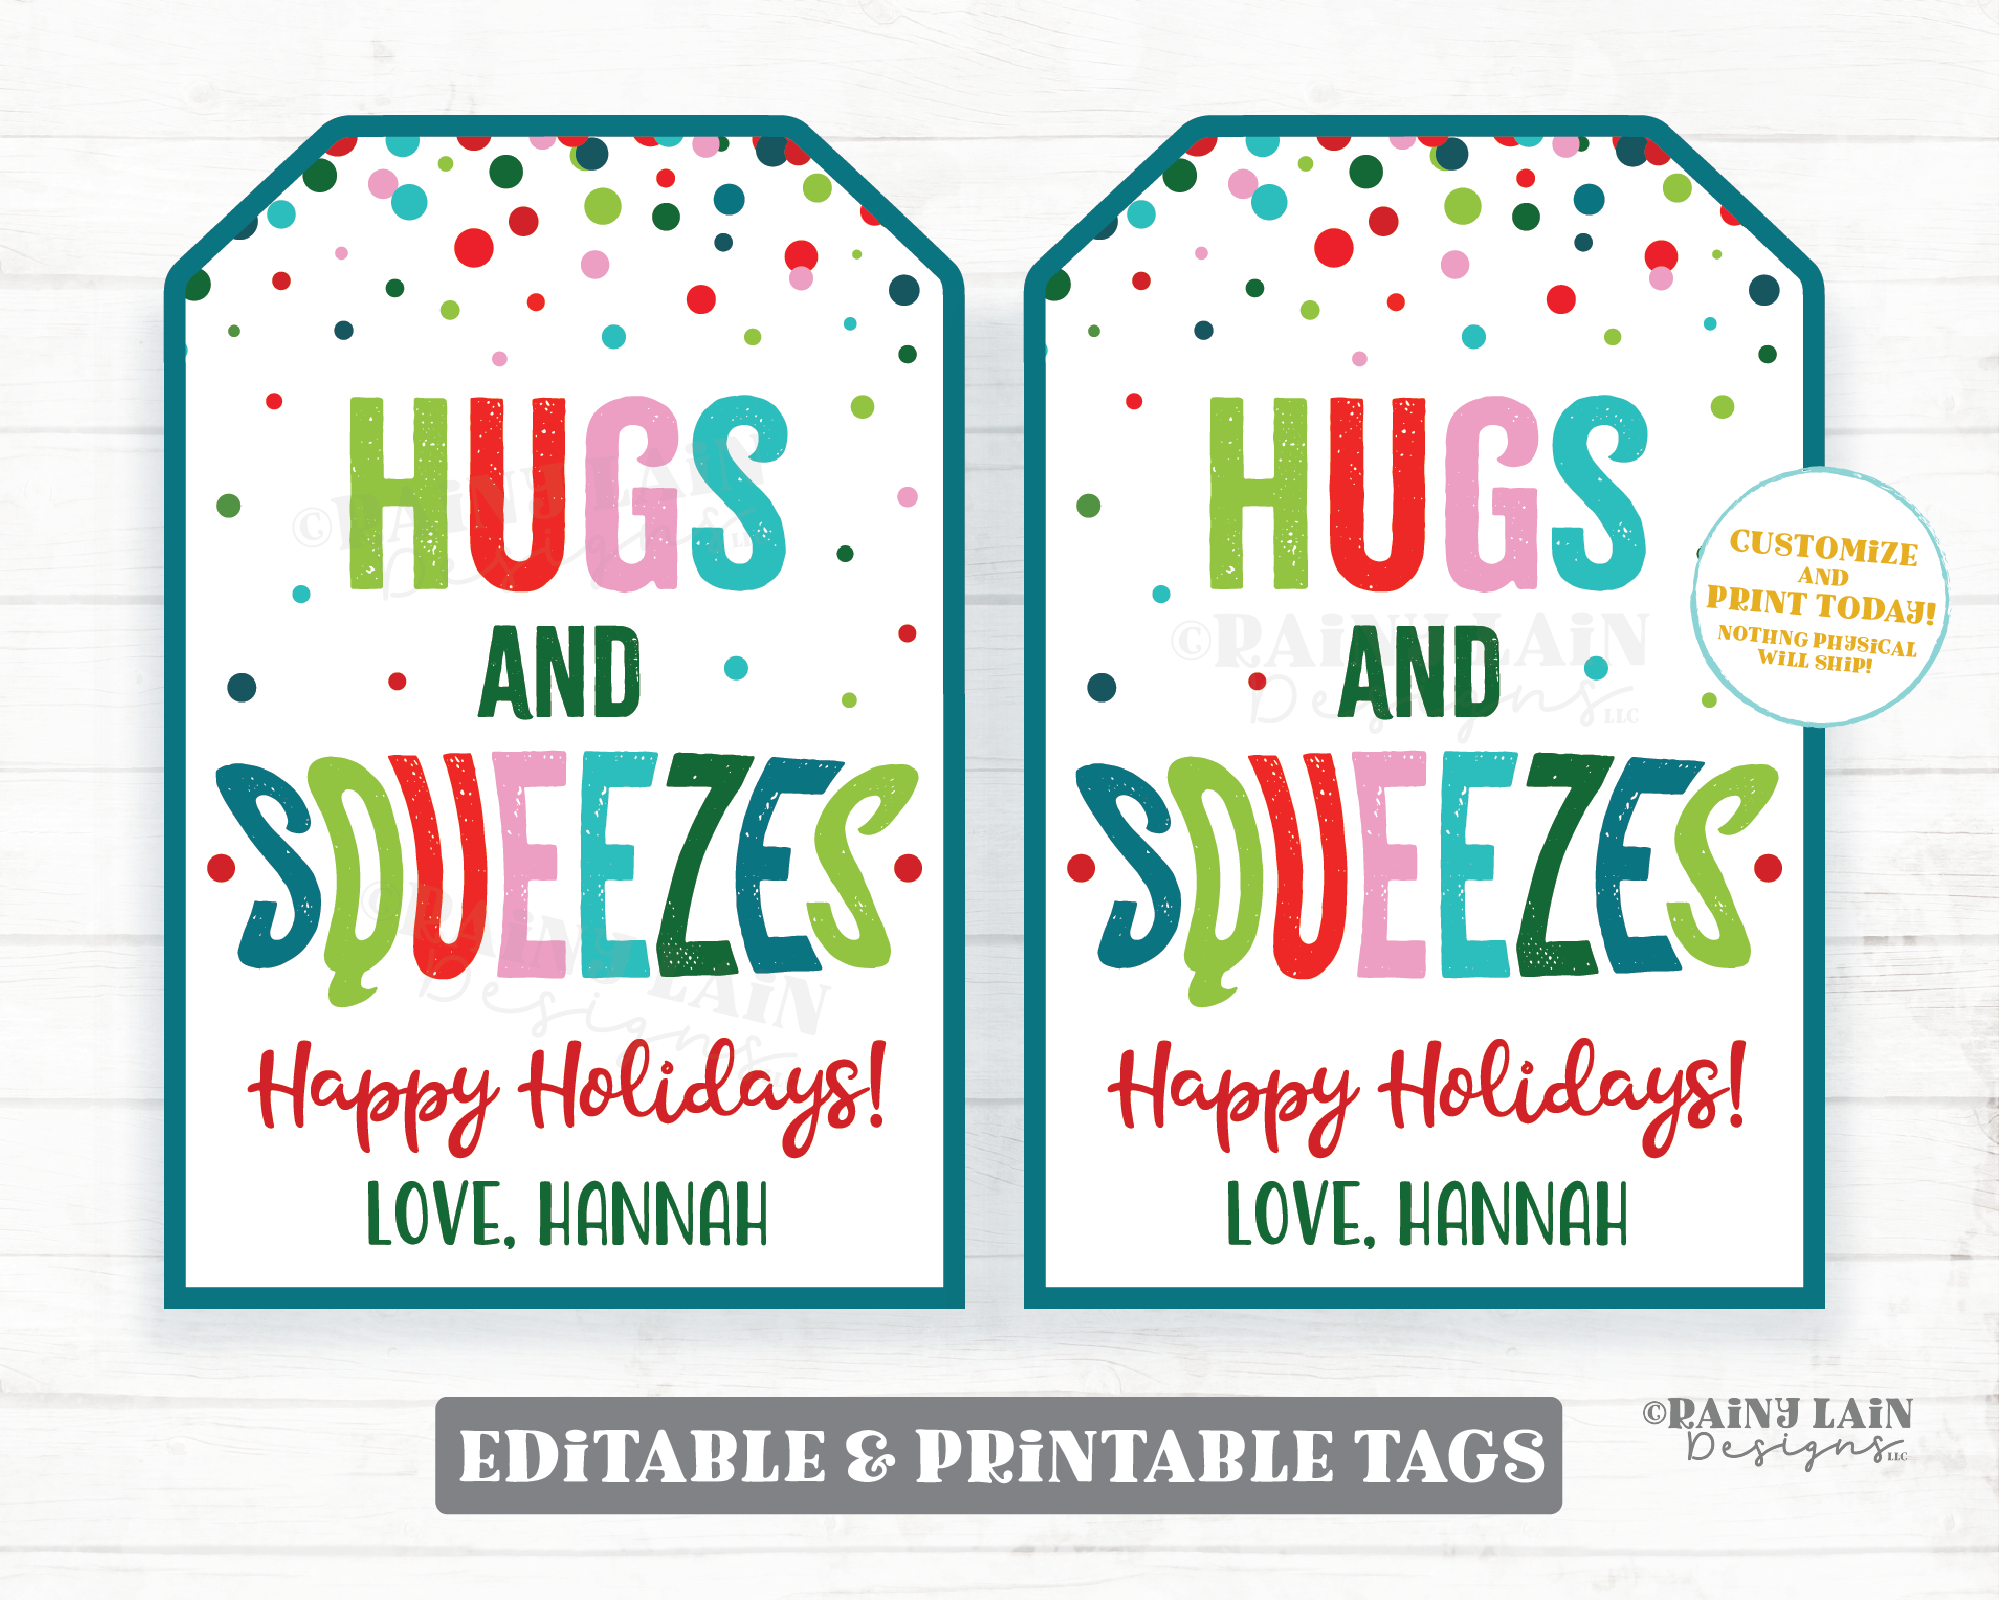 Holiday Squeeze Tags Hugs and Squeezes Christmas Squishie Applesauce Squishy Toy Squishee Christmas Gift Holiday Printable Kids editable Tag